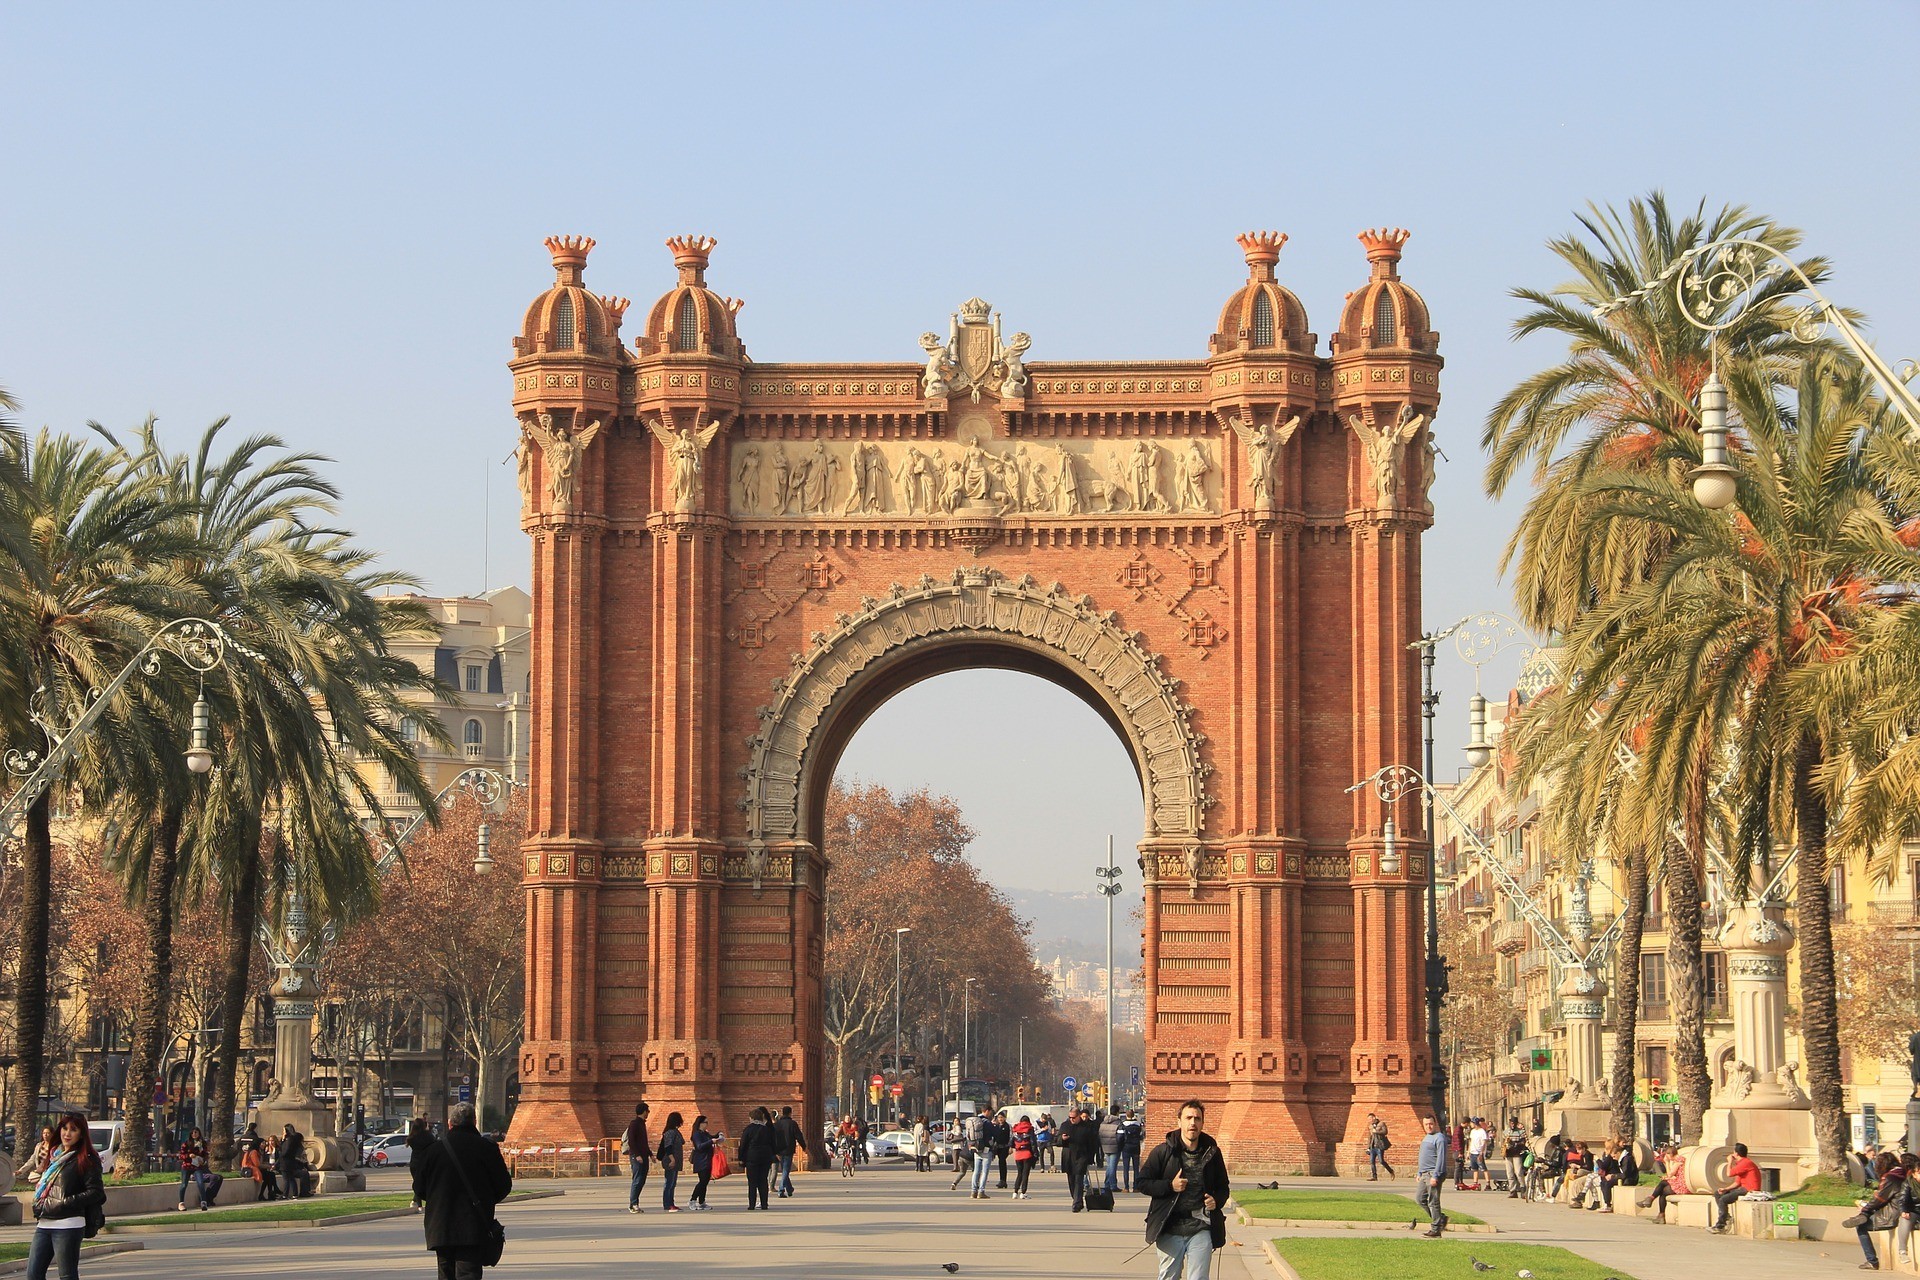 Visiting Barcelona: 5 Places Not to Miss - Arco Triunfo